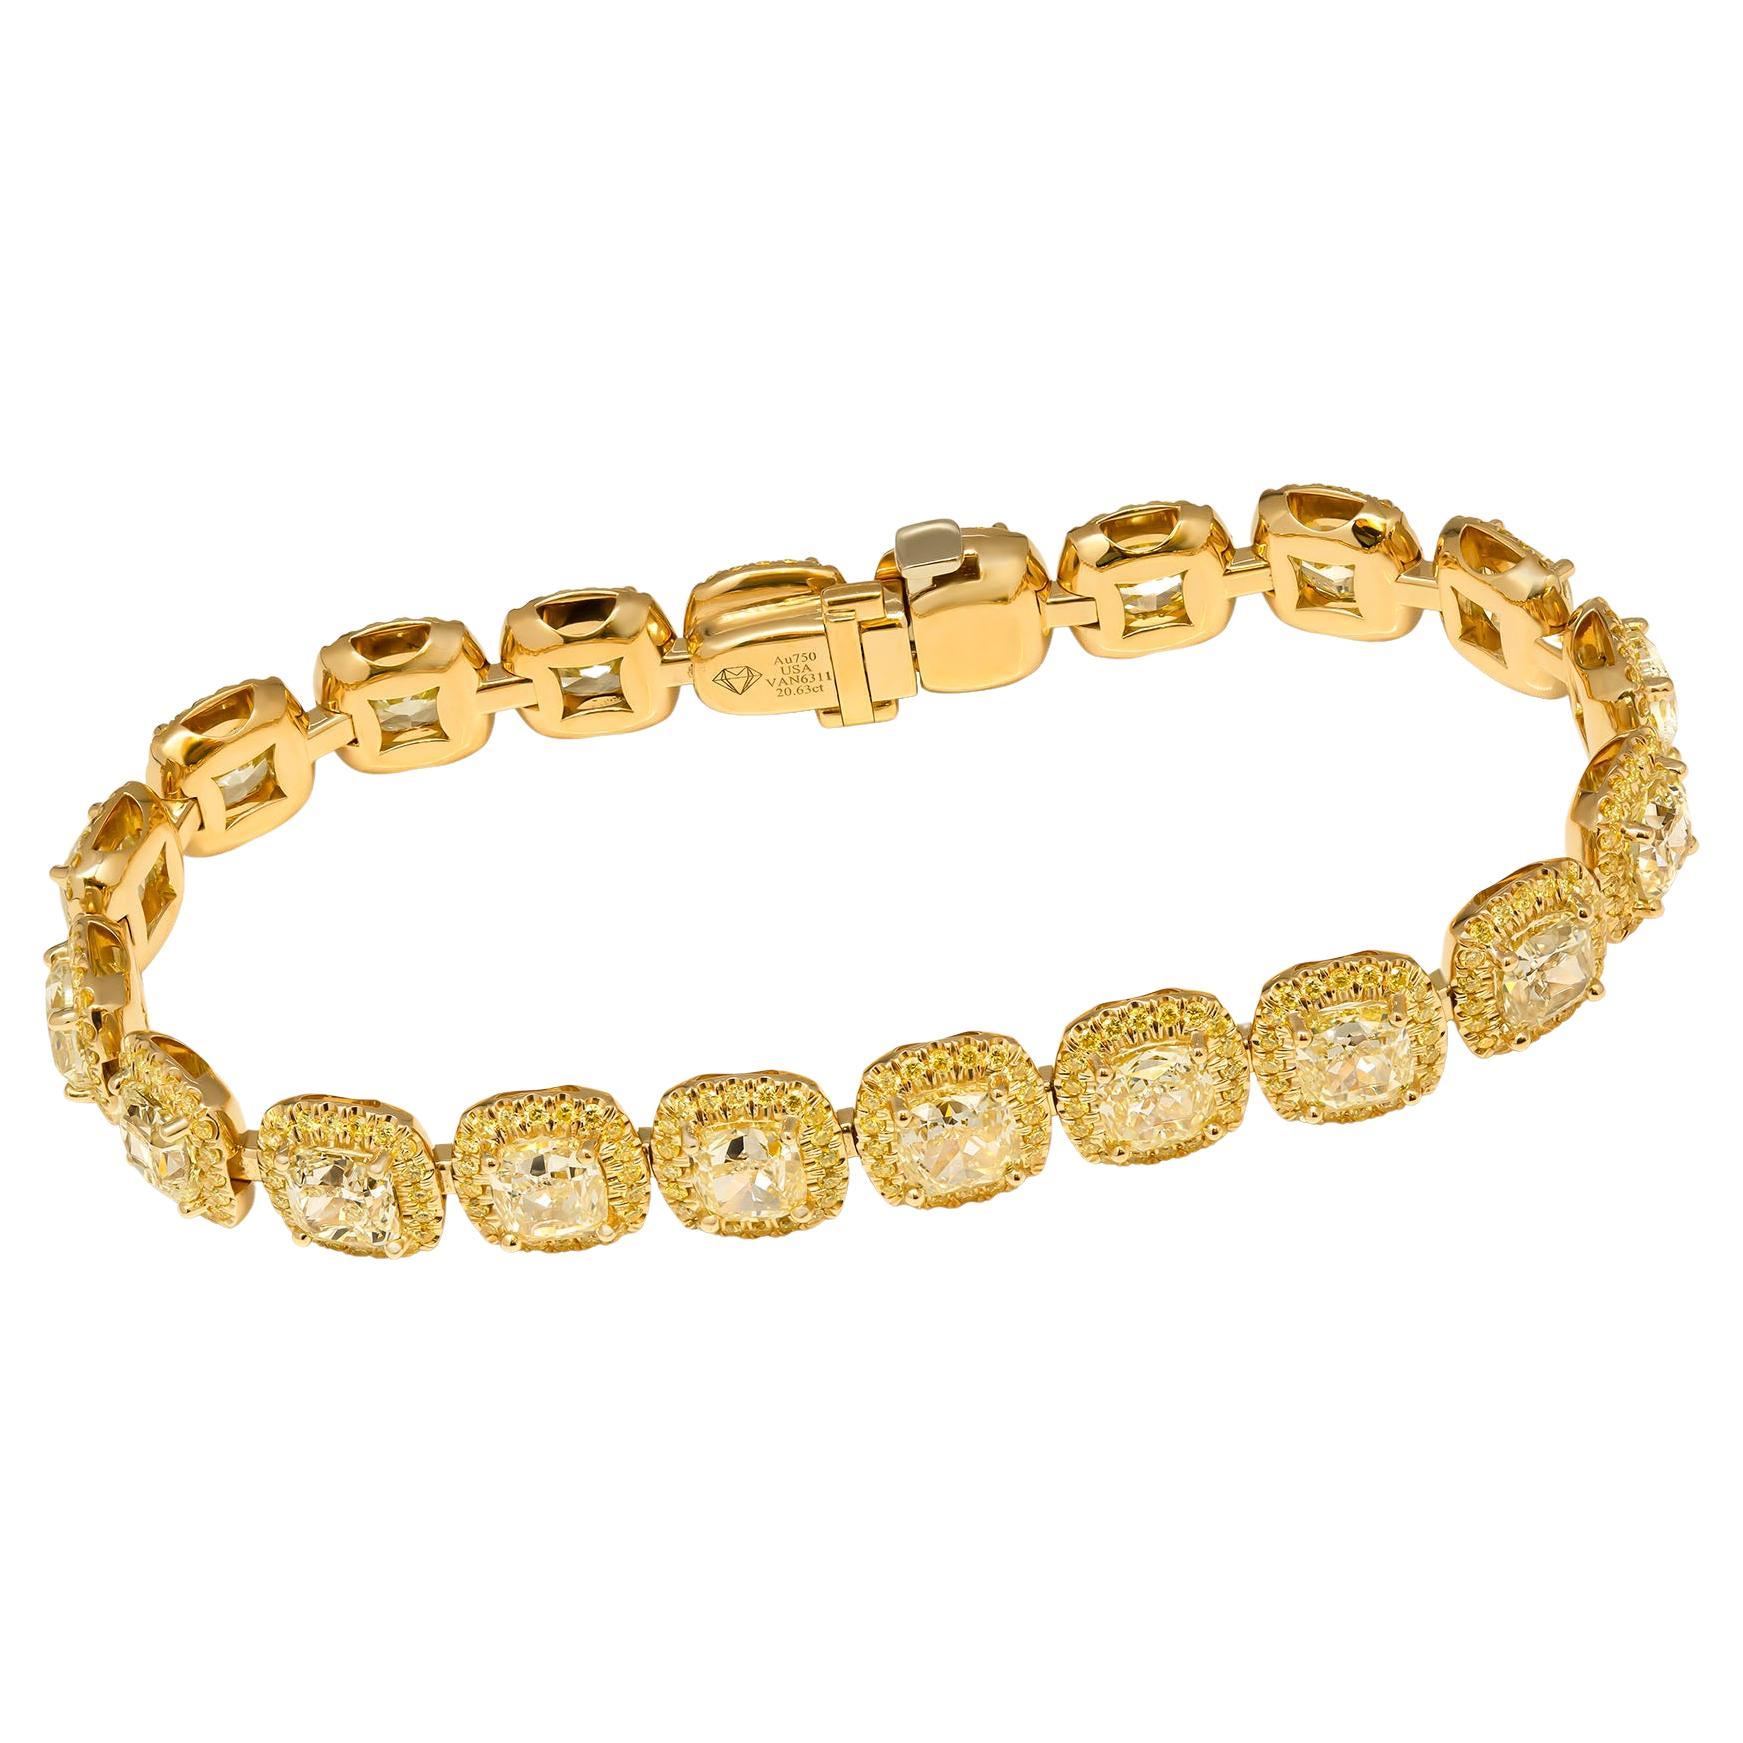 High End Fancy Bracelet!
This Luxurious Fancy Yellow Diamond Bracelet crafted in 18K Yellow Gold, featuring 20 Large Cushion Cuts Yellow Diamonds, each diamond is 1.00+ct in average (combined weight of 20.63 carats).
Delicate halo around  each stone